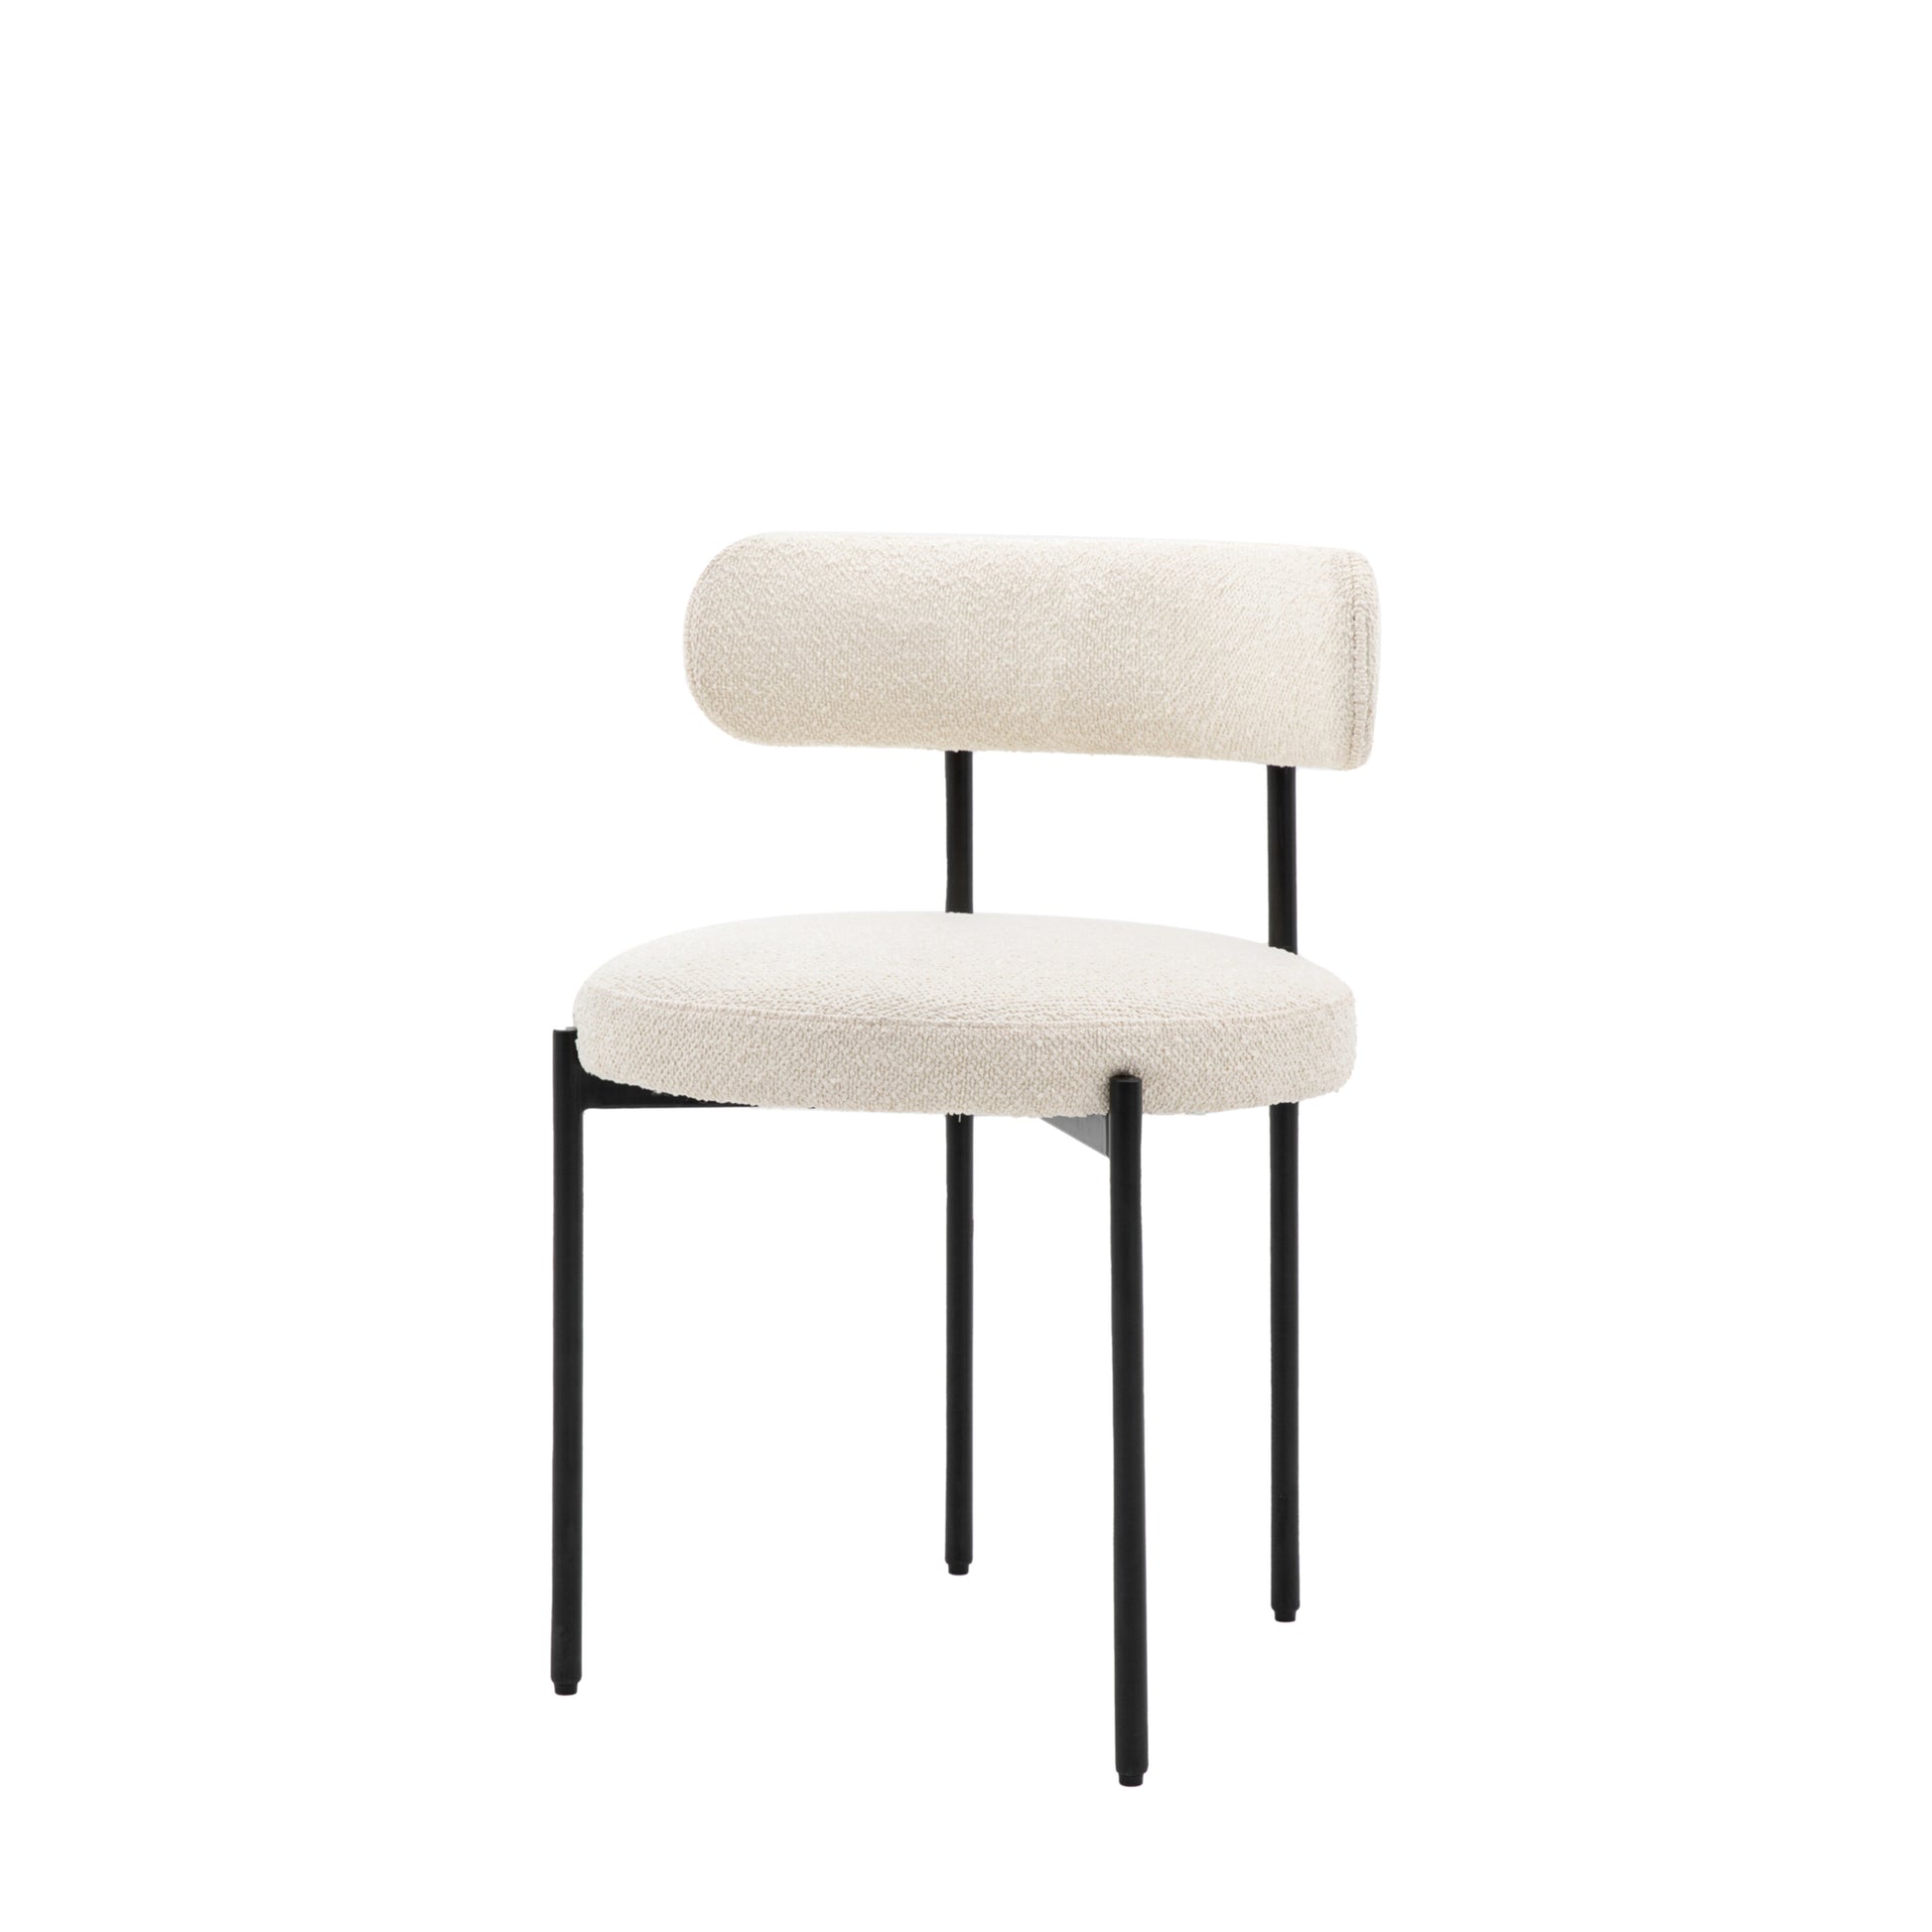 Remi Metal And Fabric Dining Chair | Vanilla (2 Pack) 